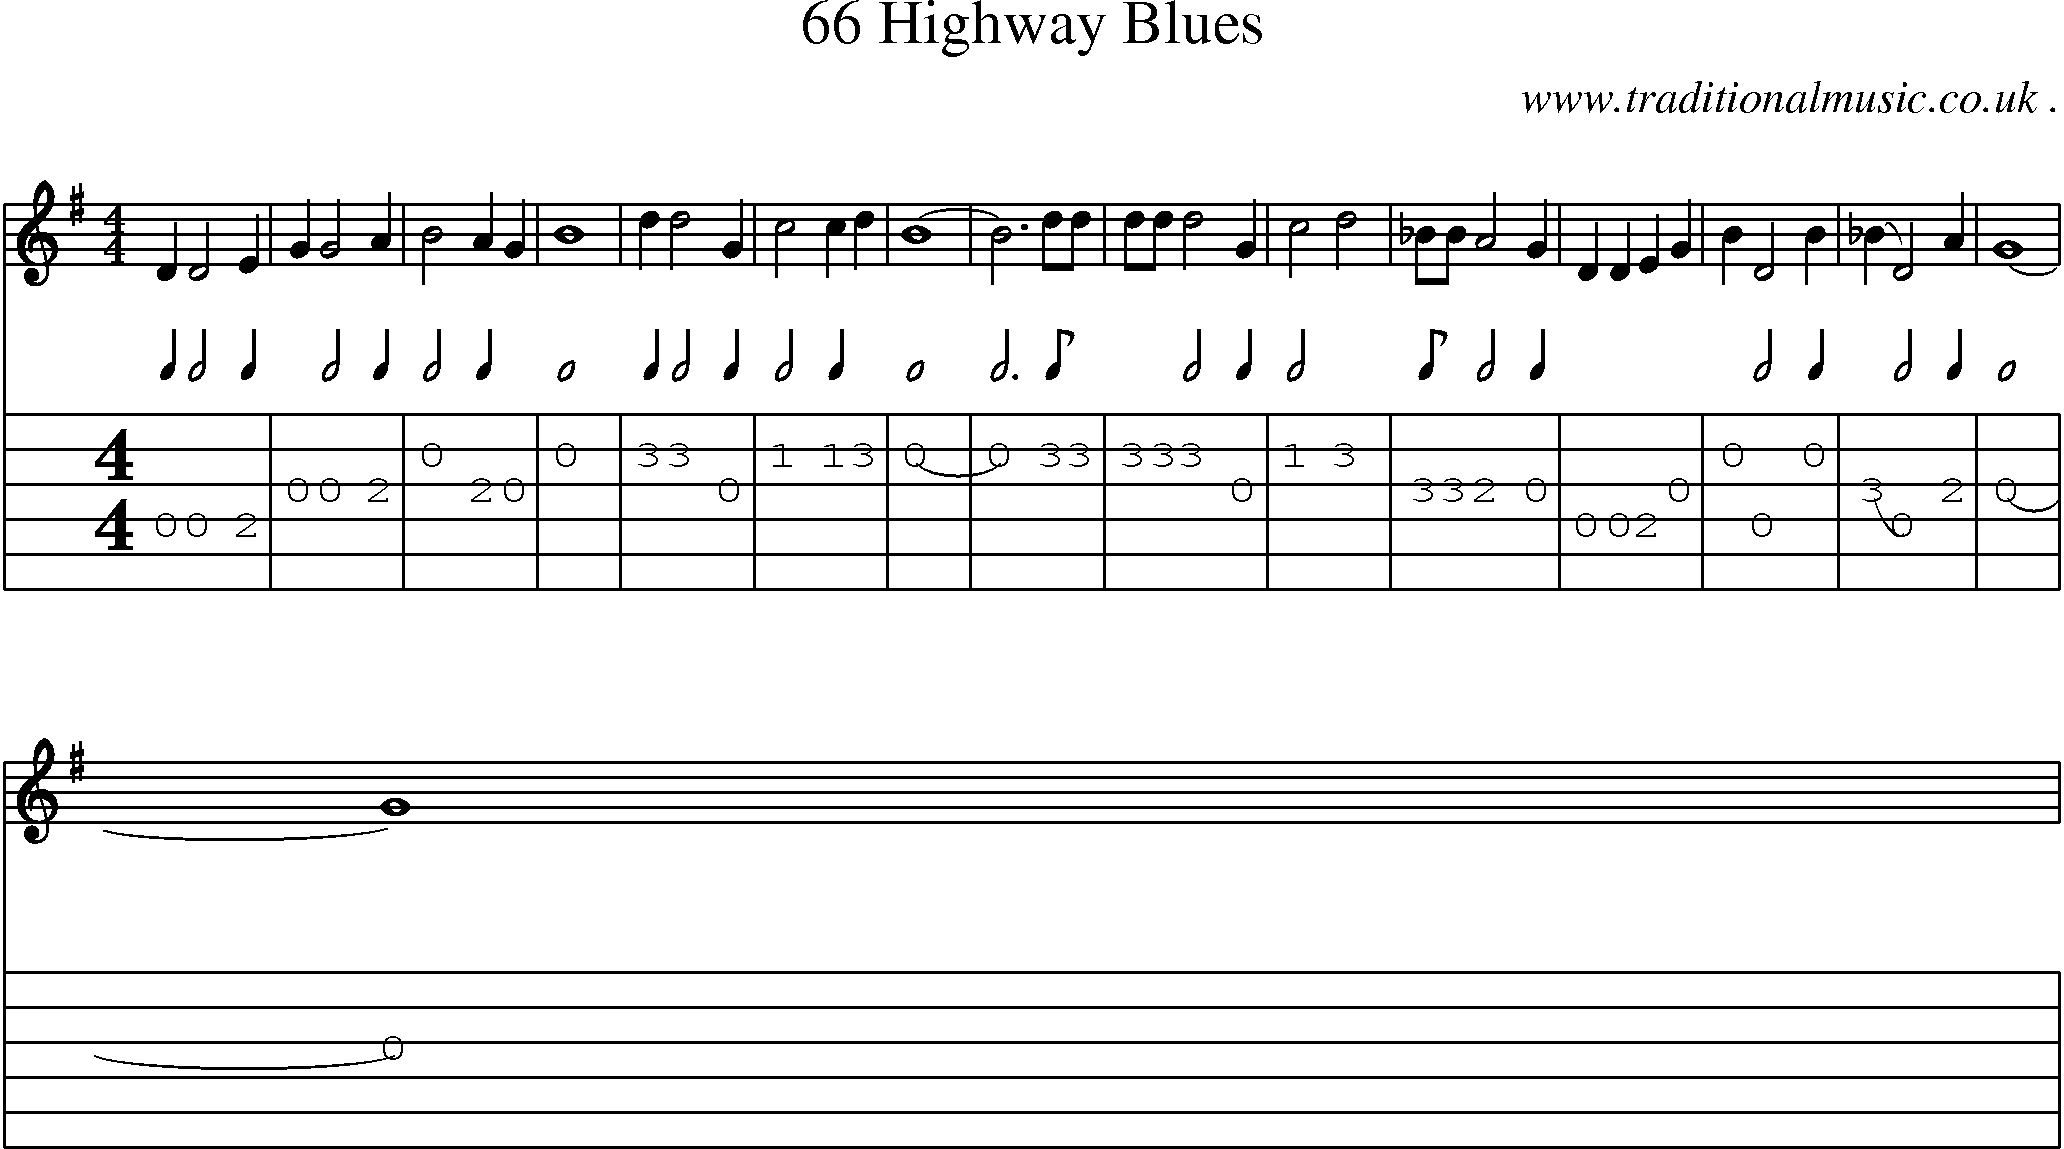 Music Score and Guitar Tabs for 66 Highway Blues